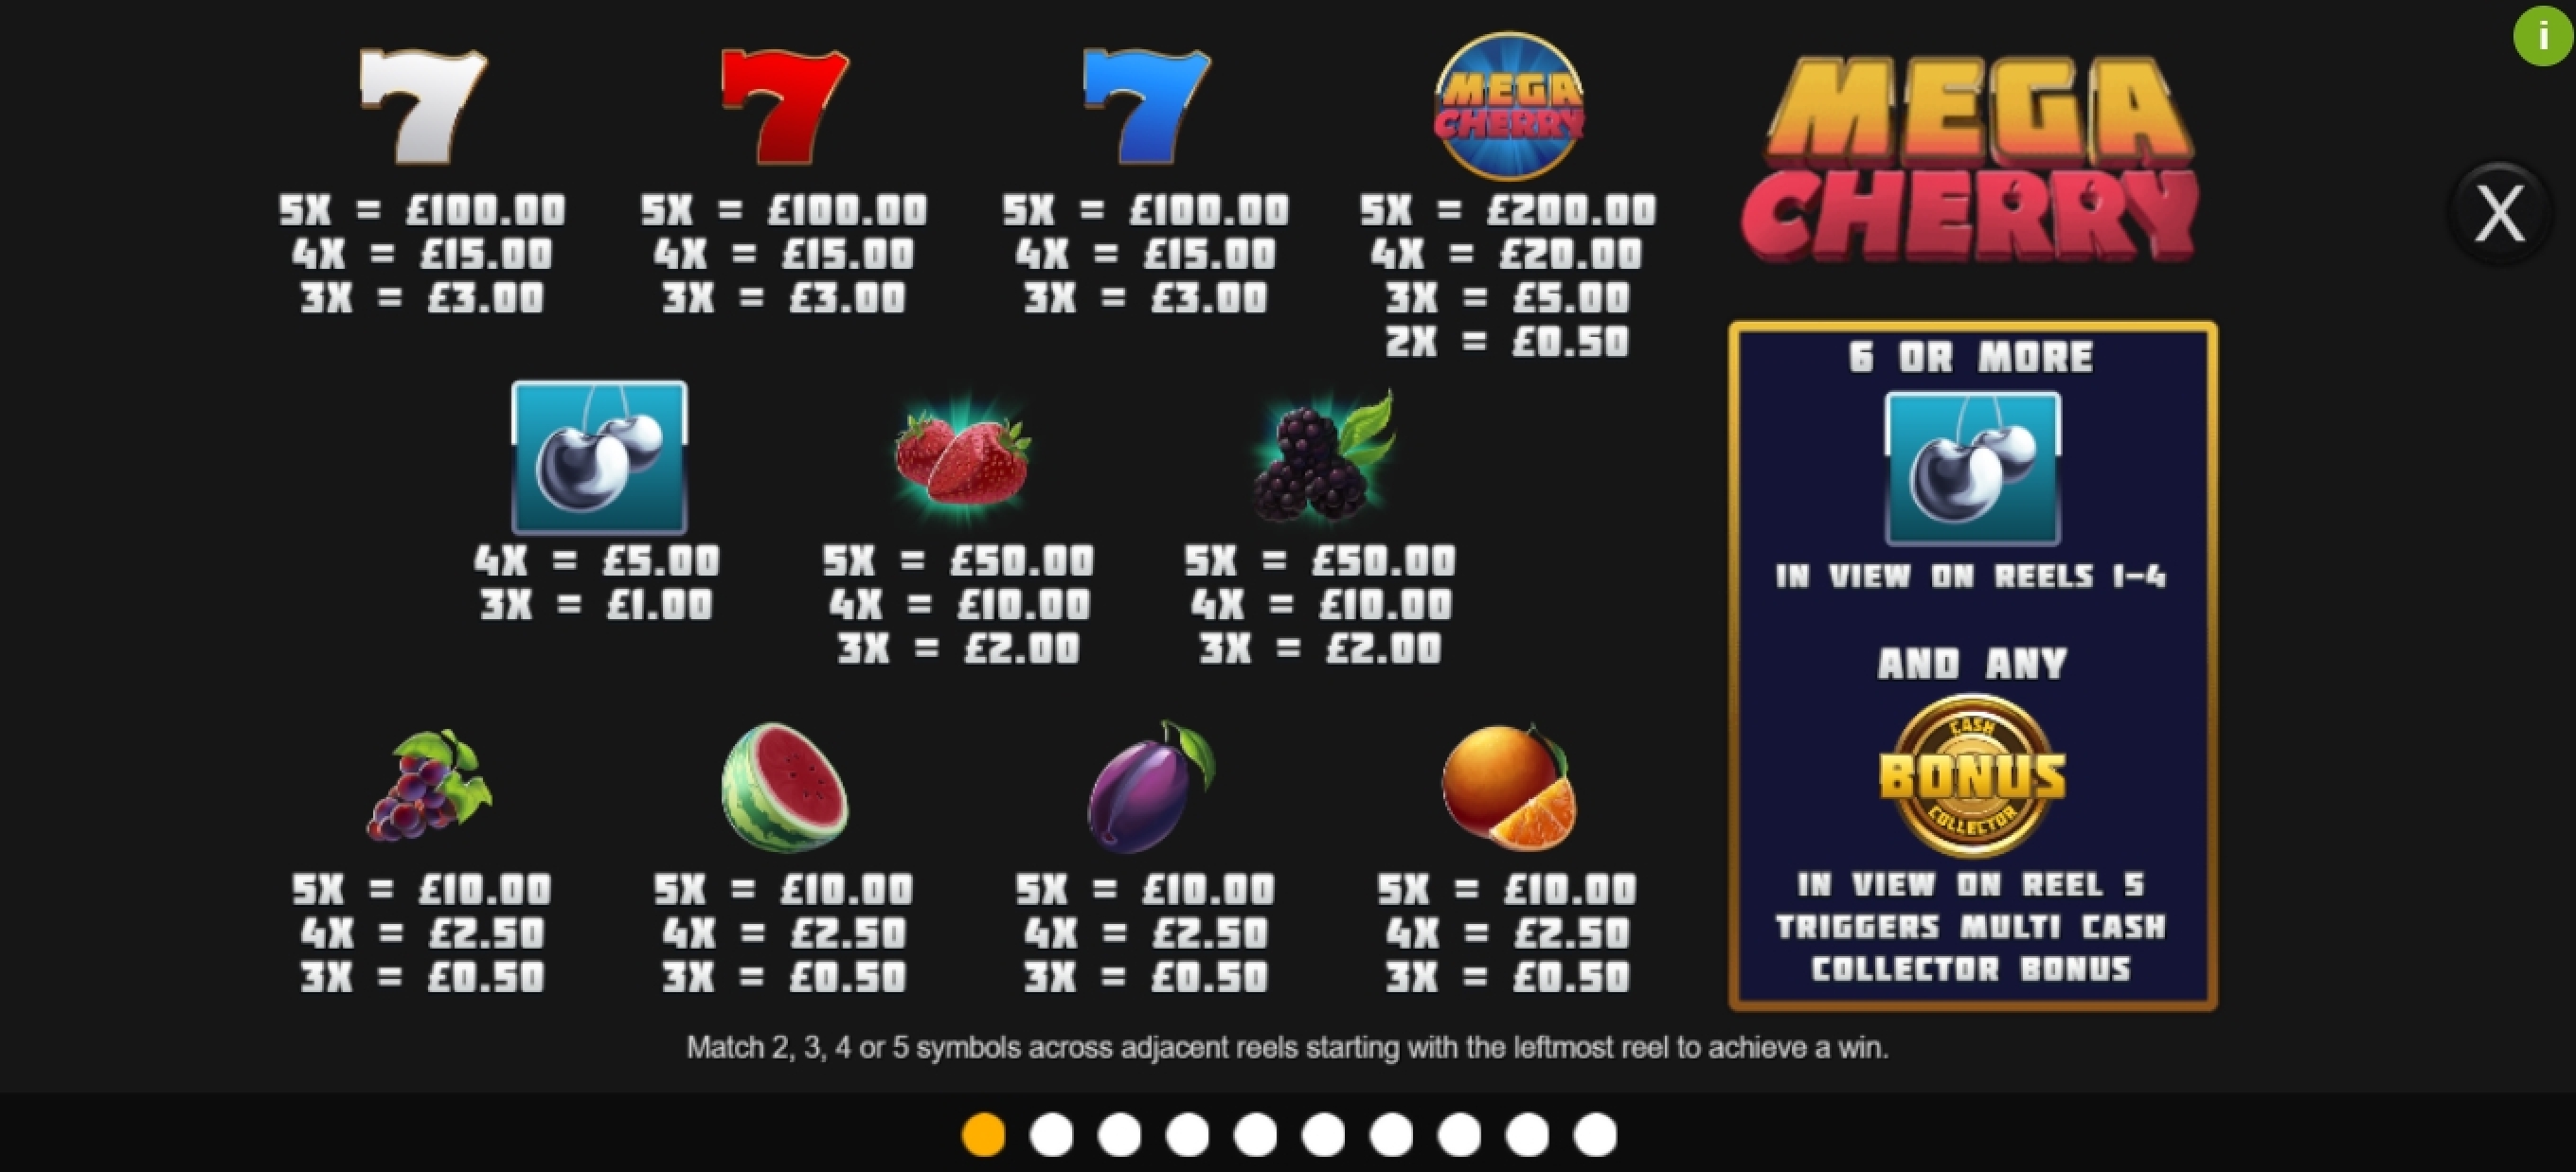 Info of Mega Cherry Slot Game by Inspired Gaming